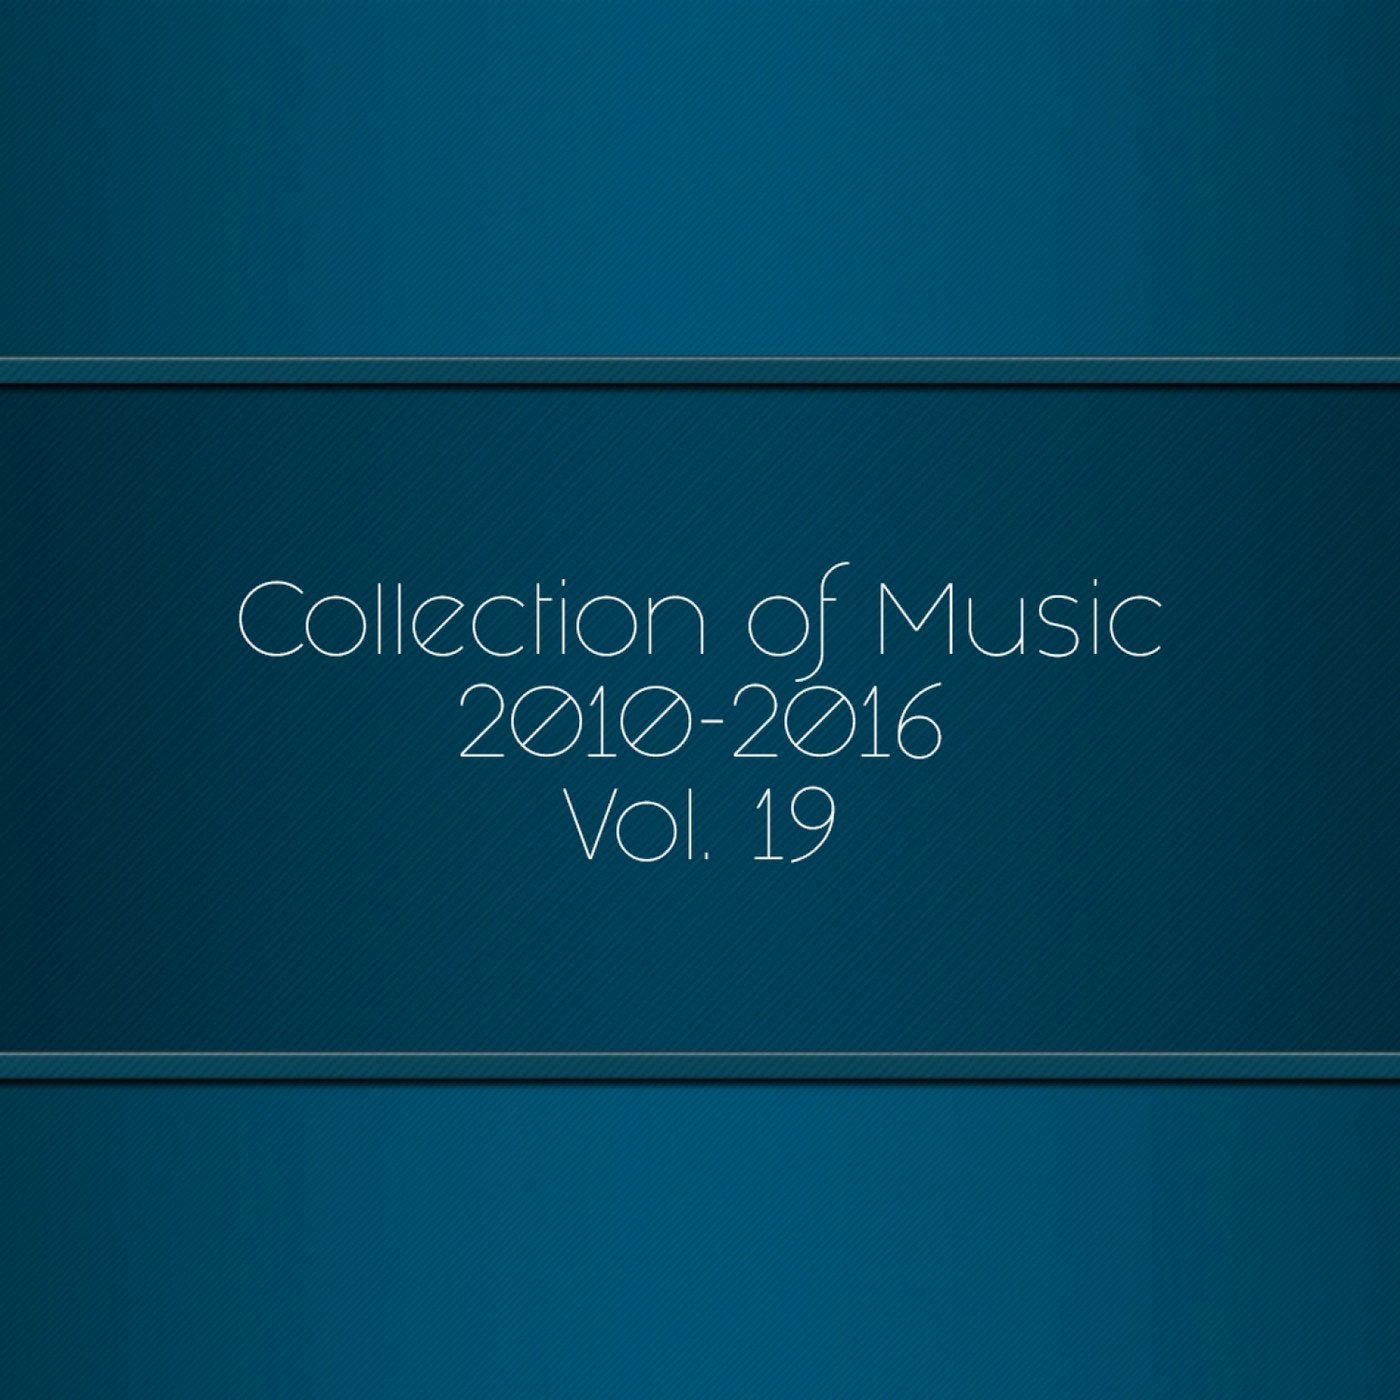 Collection of Music 2010-2016, Vol. 19